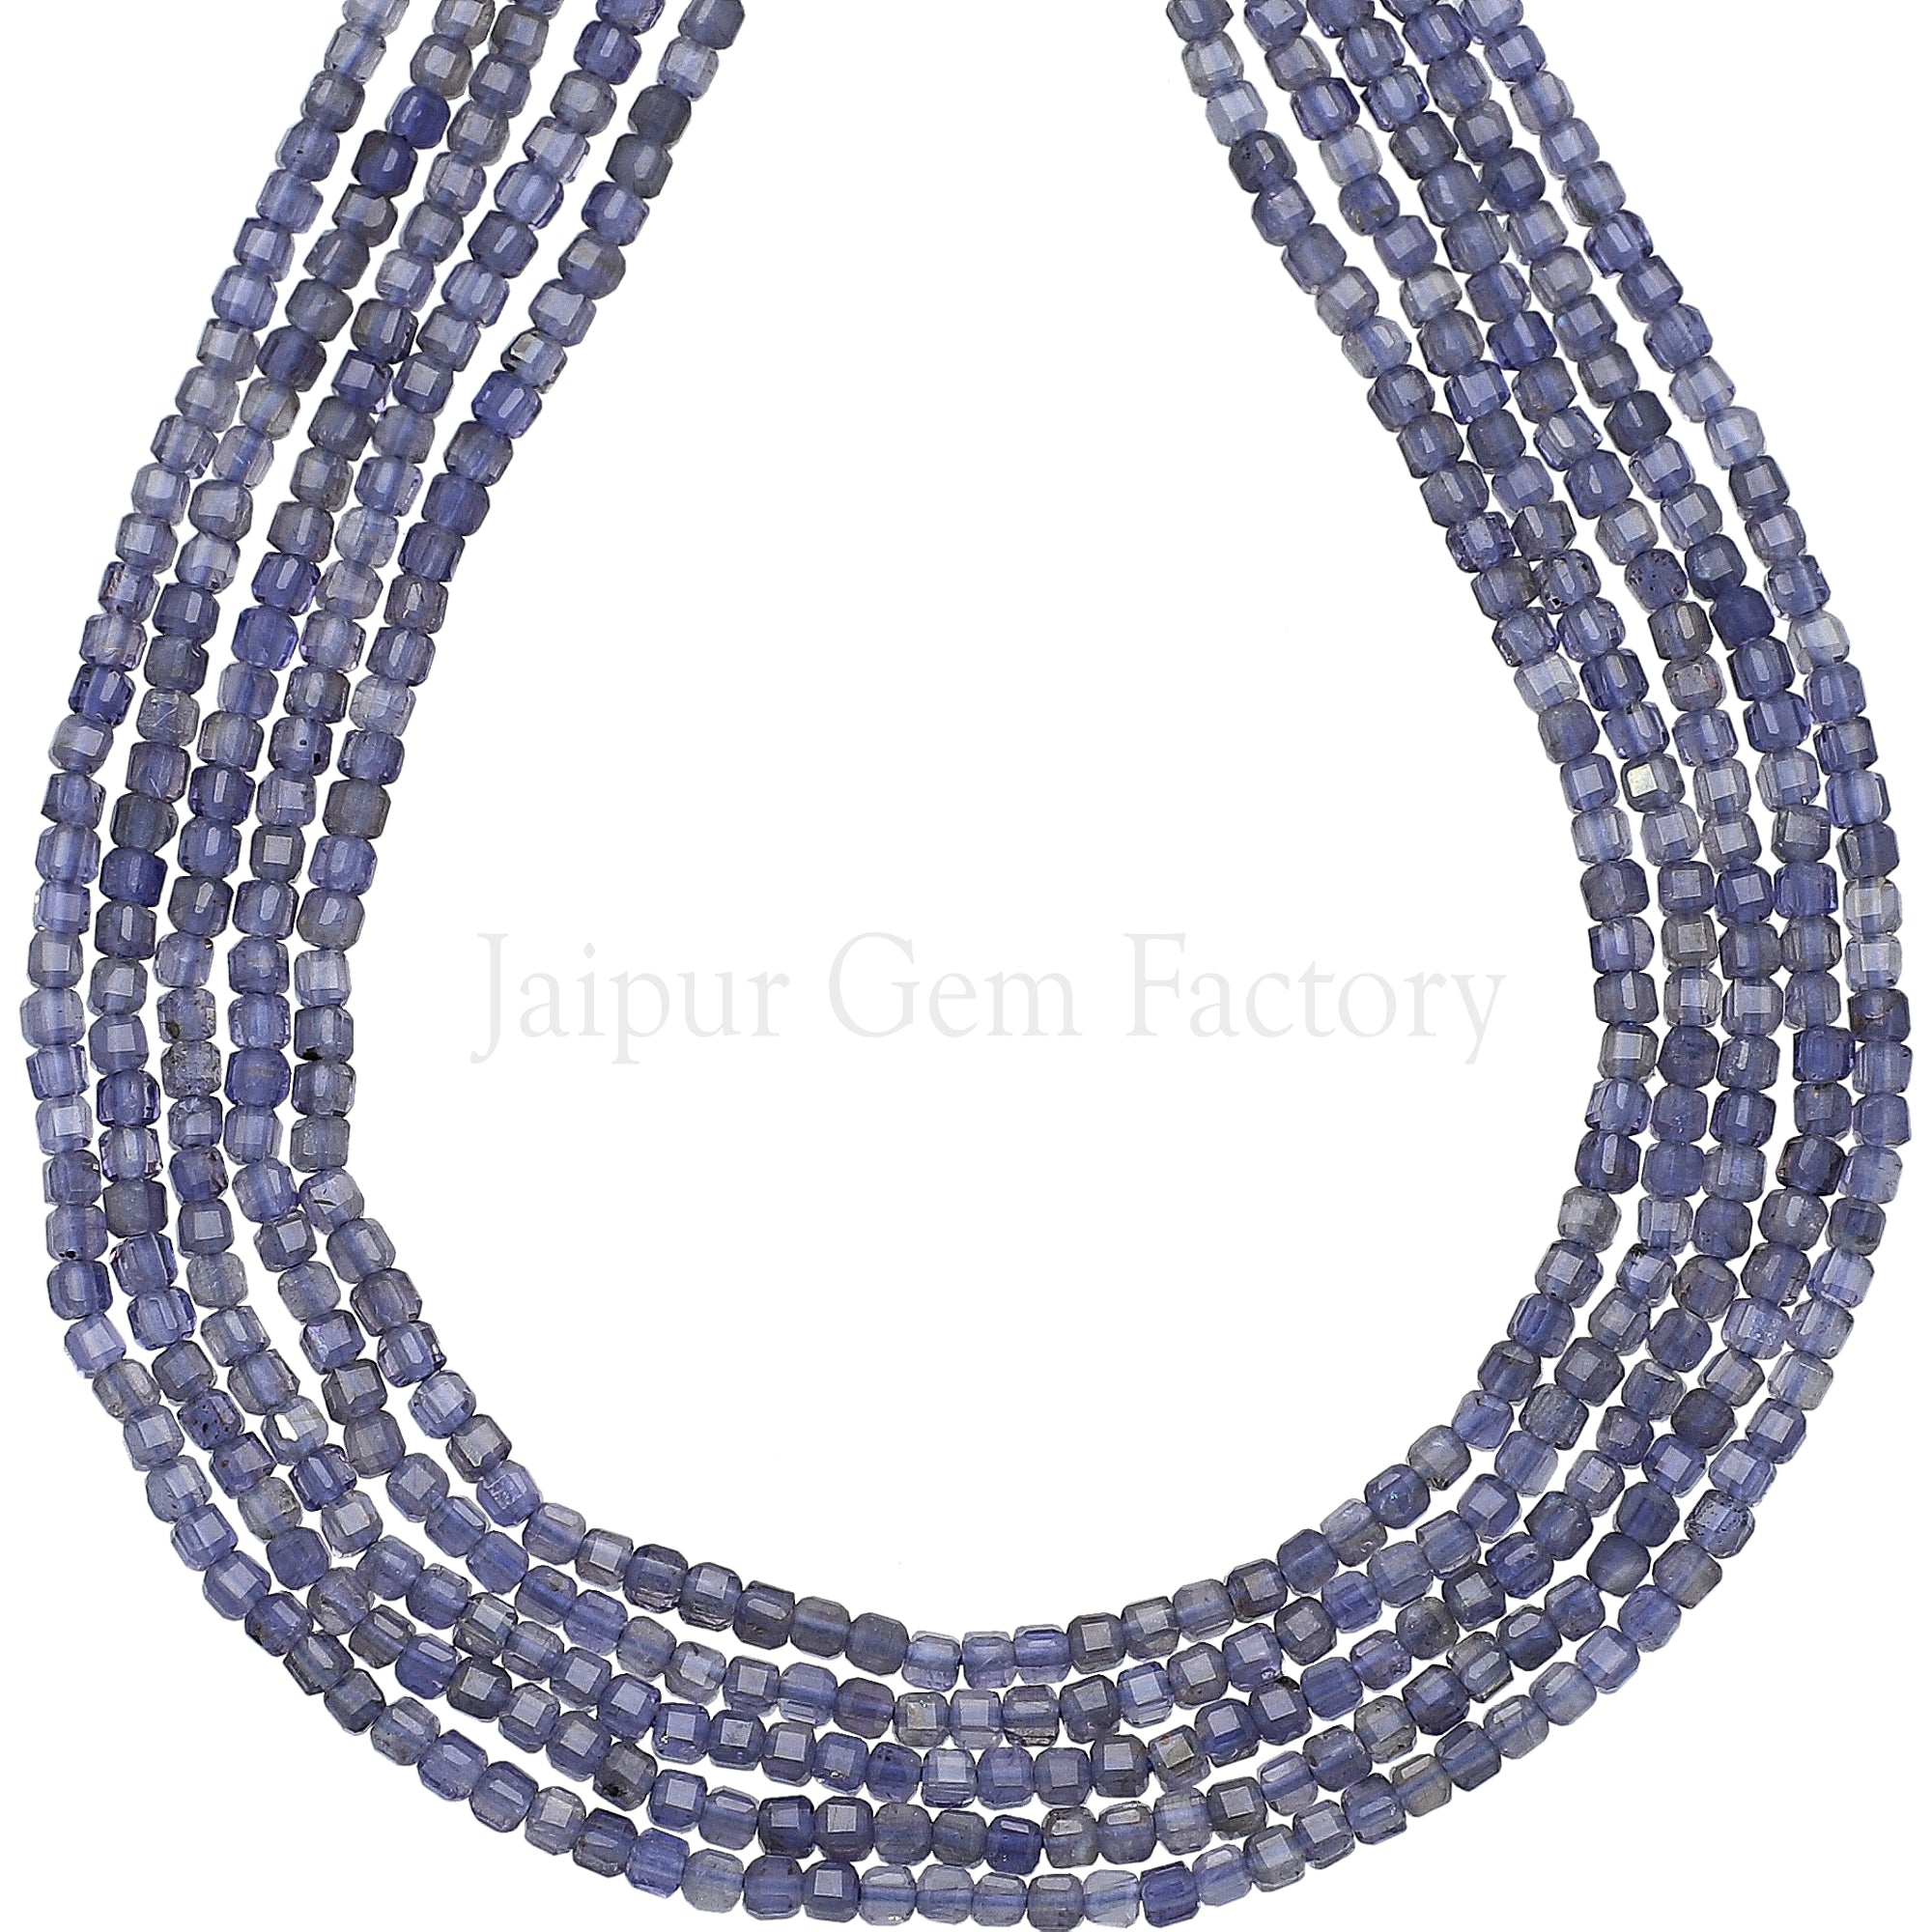 2.3-2.5 MM Iolite Faceted Box Beads